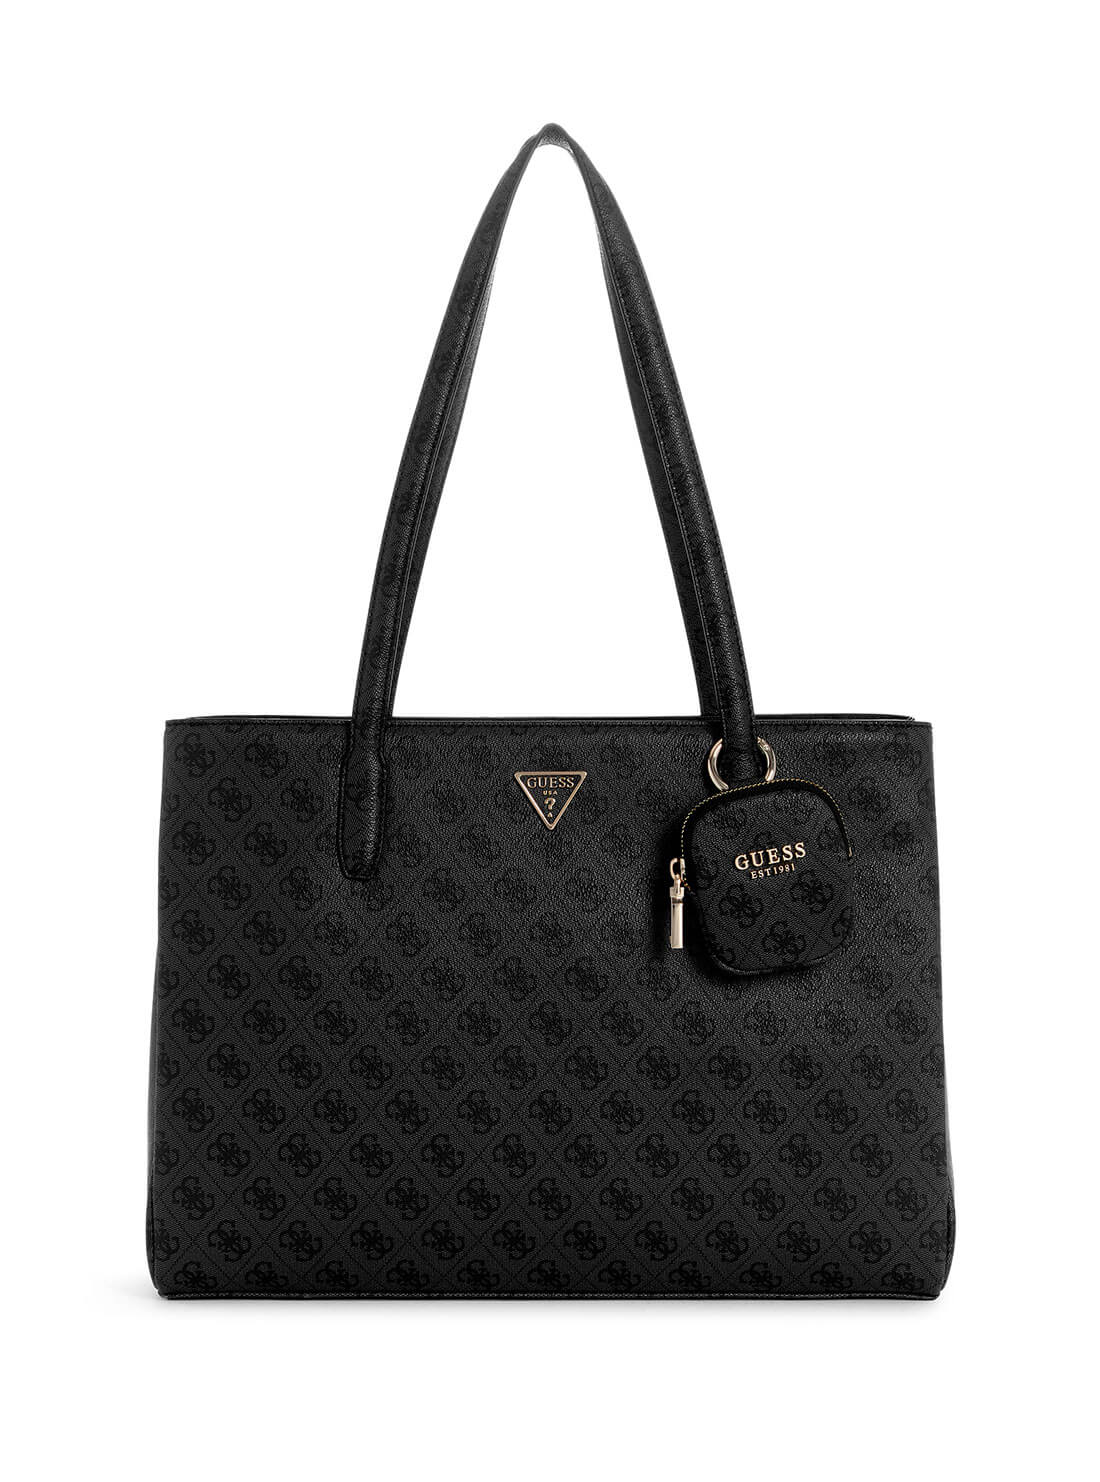 GUESS Black Logo Power Play Tote Bag front view